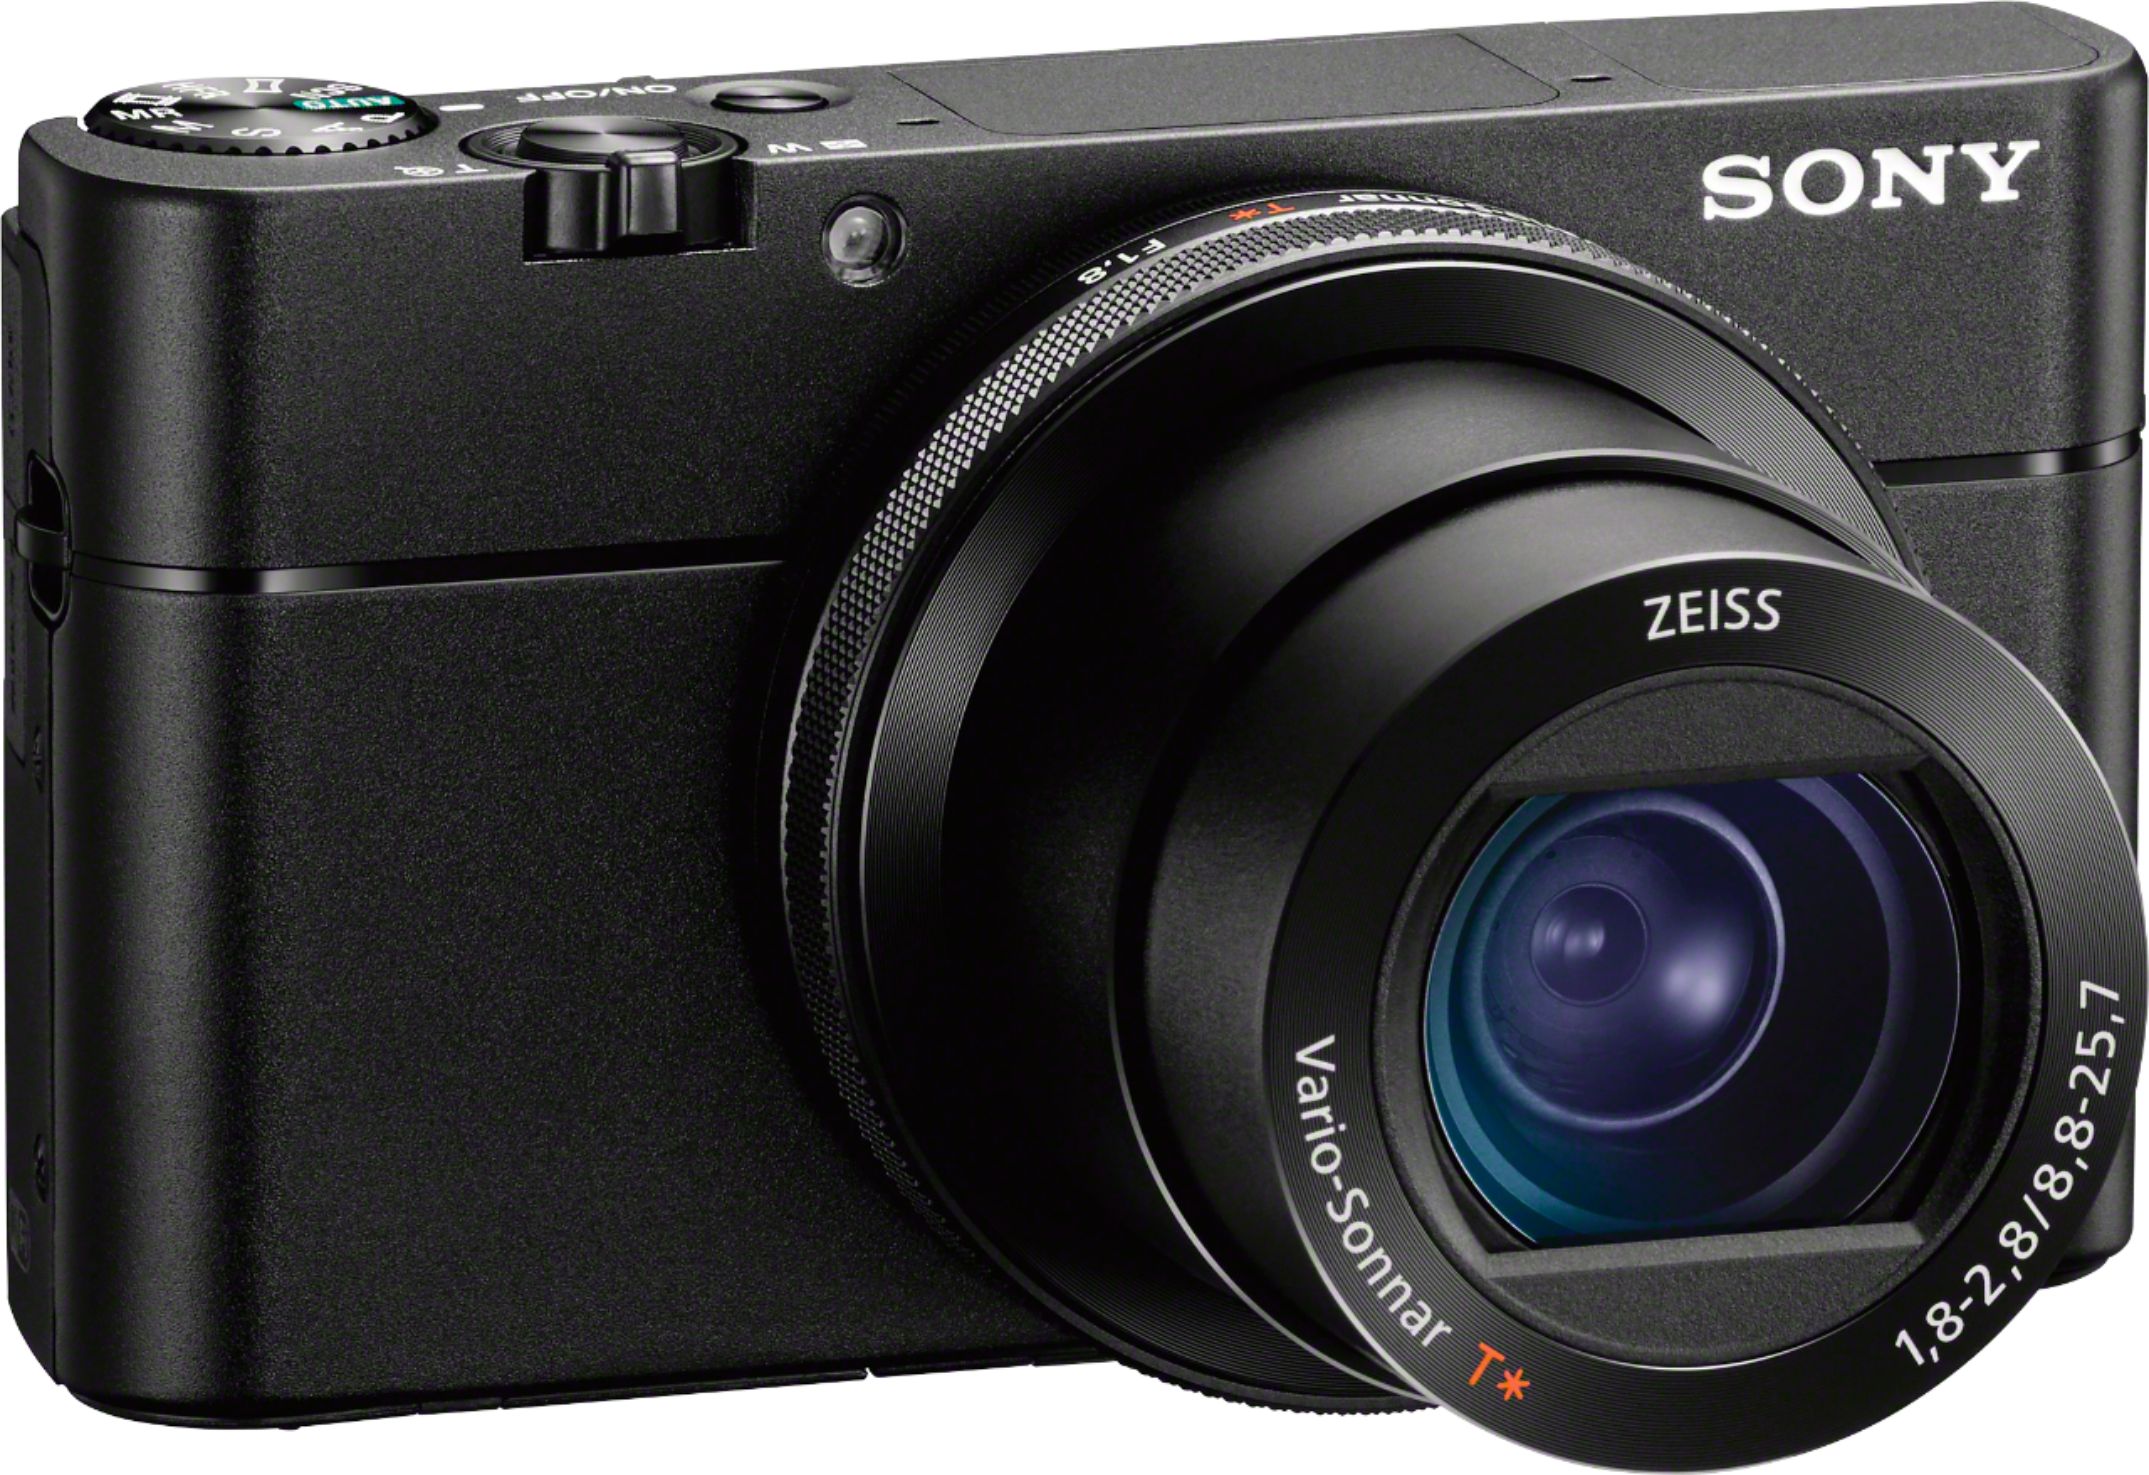 Angle View: Canon PowerShot SX70 HS 20.3MP 65x Optical Zoom Digital Point & Shoot Camera